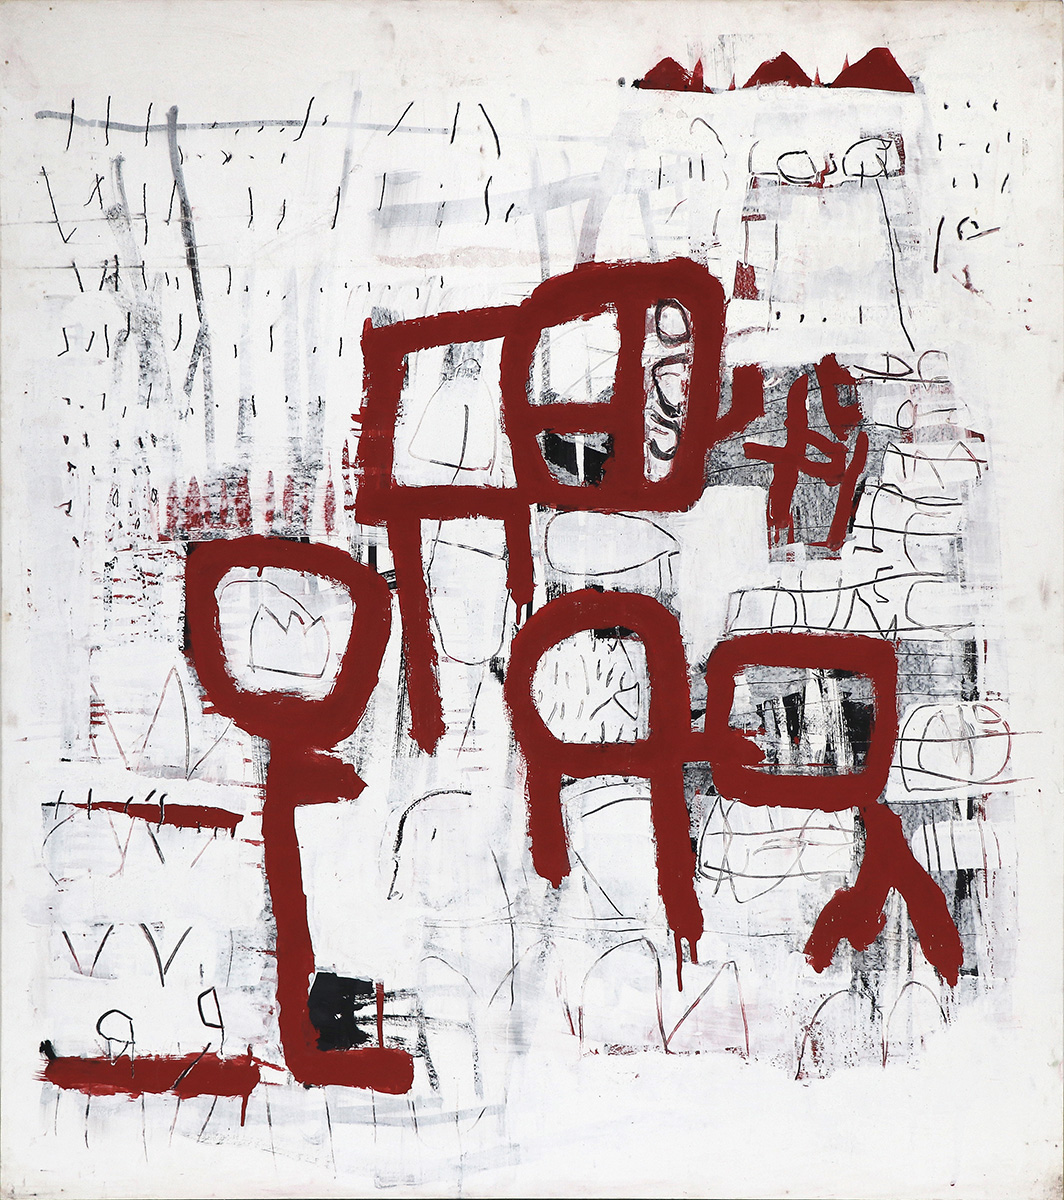 Rote Zeichen, 2014103 x 90 x 4 cmMixed media on paper, on wooden frame